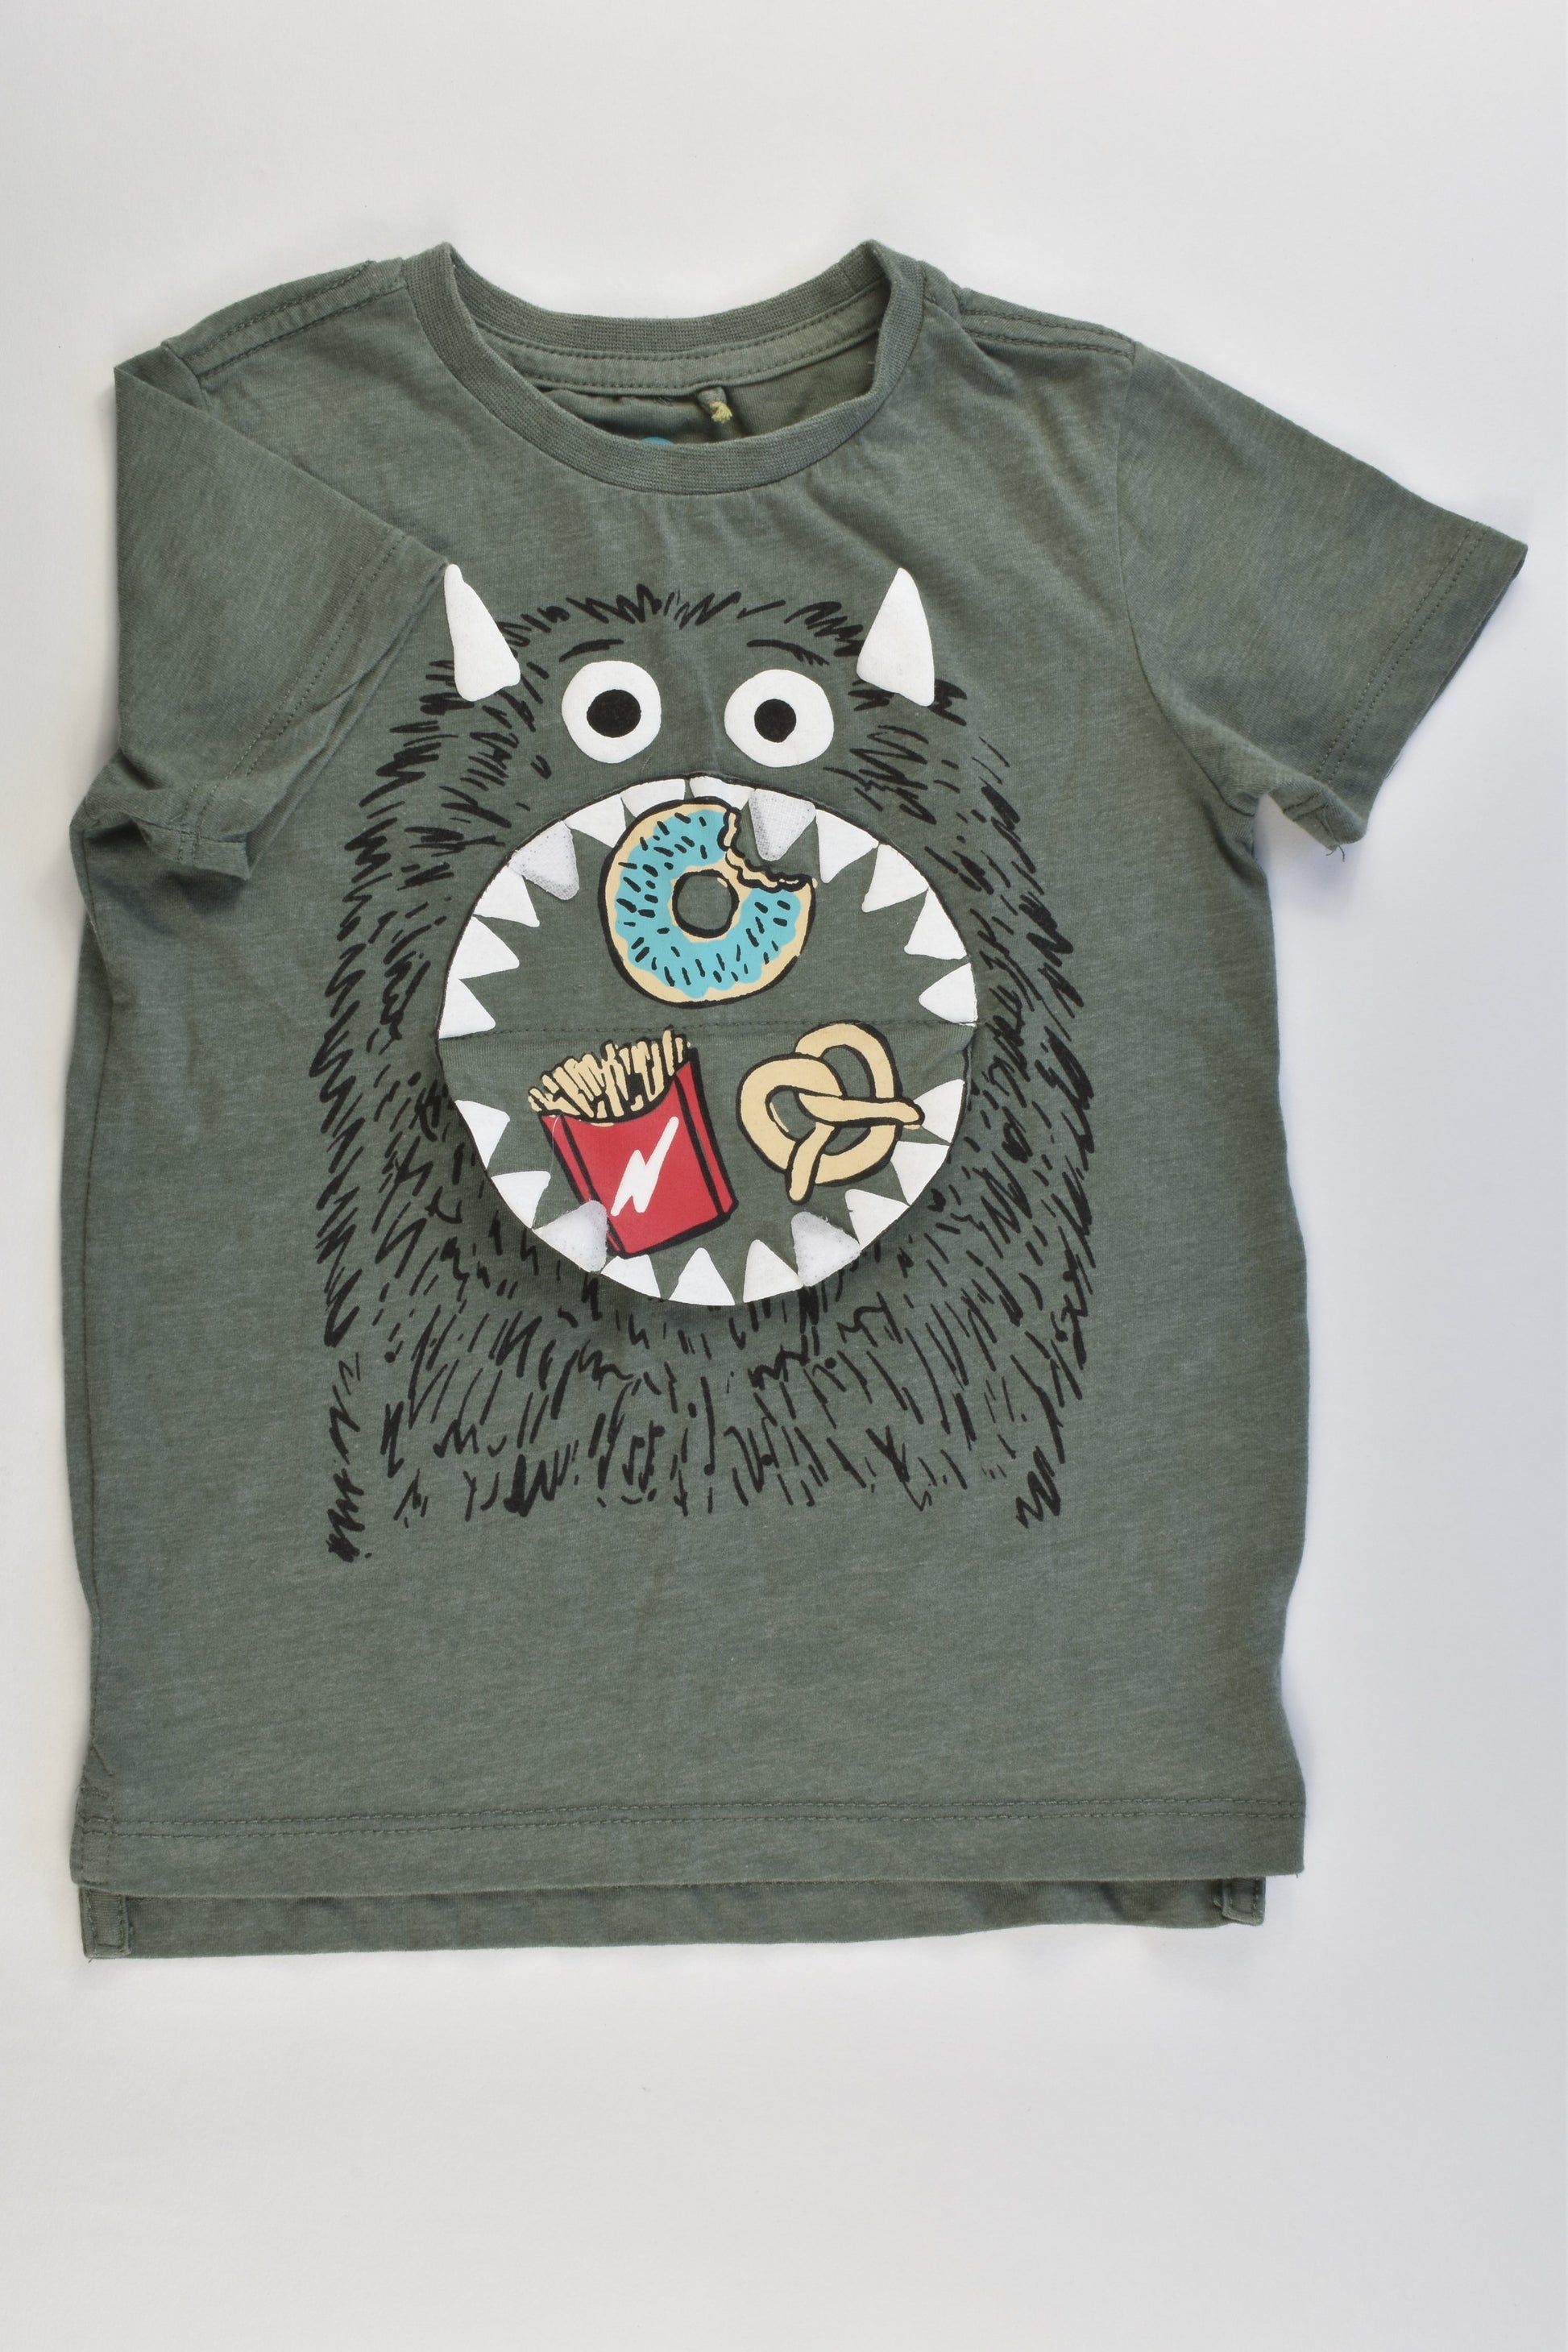 Cotton On Kids Size 3 Food Monster T-shirt